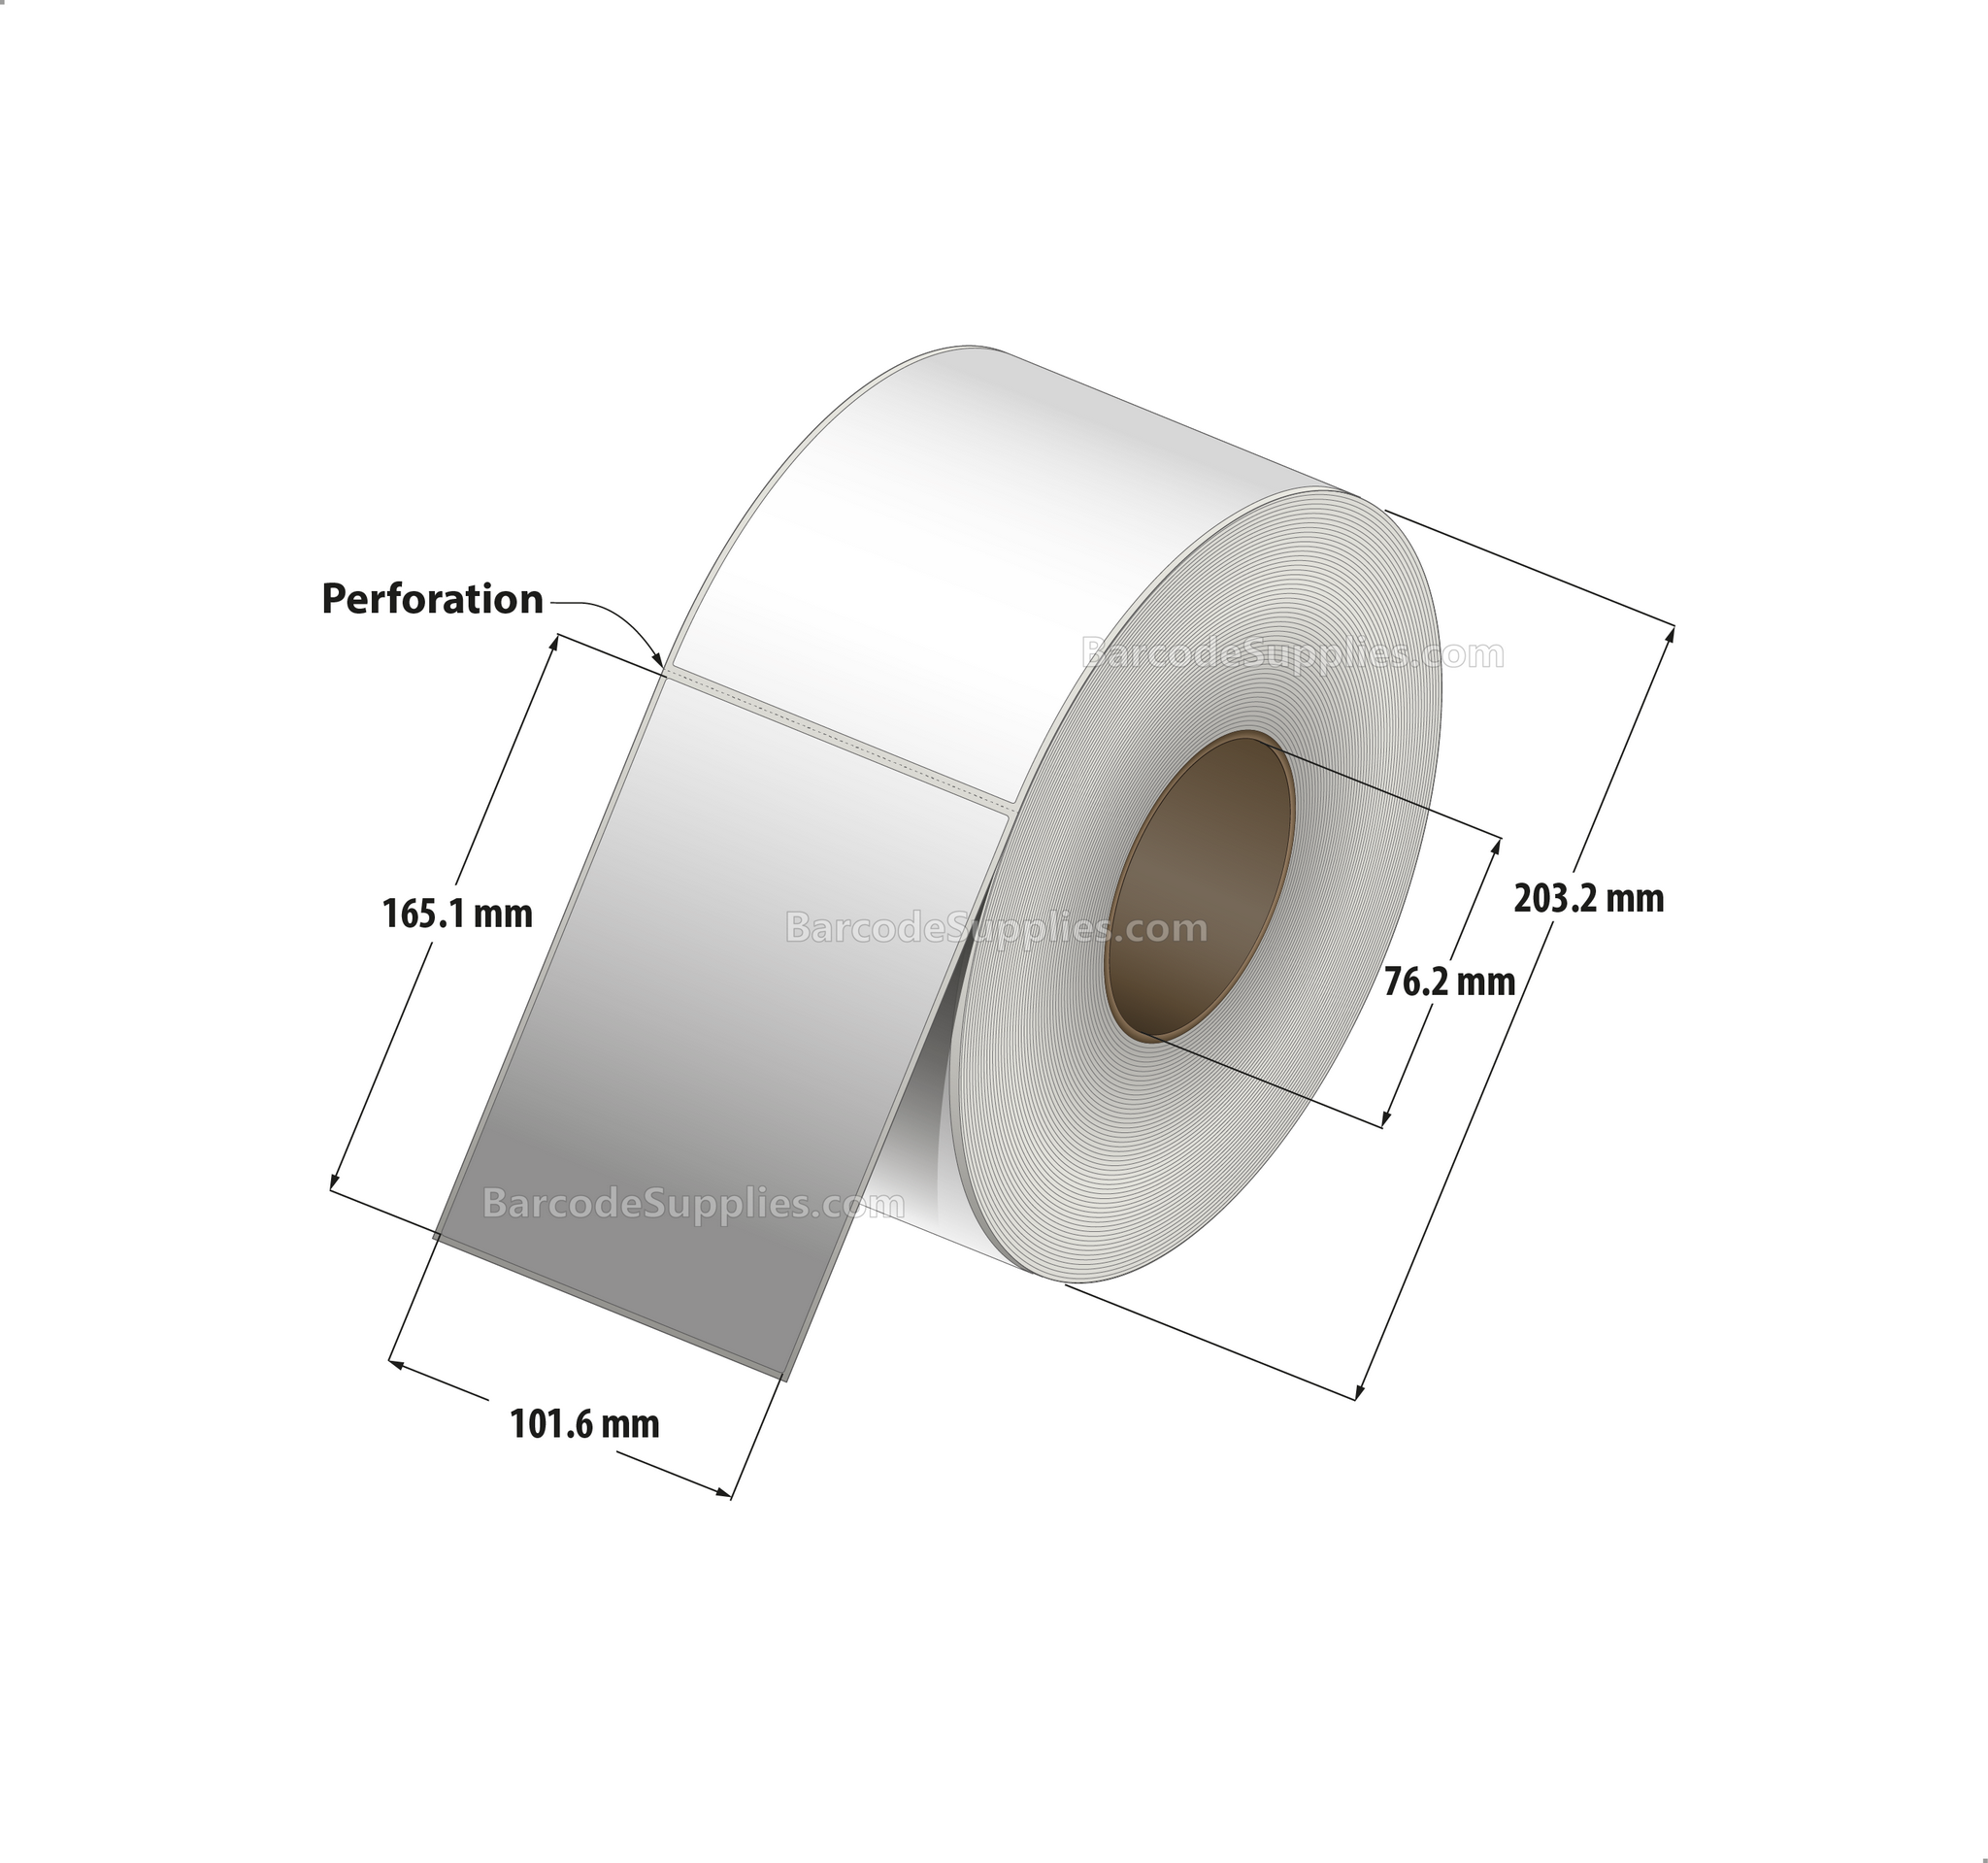 4 x 6.5 Direct Thermal White Labels With Acrylic Adhesive - Perforated - 900 Labels Per Roll - Carton Of 4 Rolls - 3600 Labels Total - MPN: RD-4-65-900-3 - BarcodeSource, Inc.